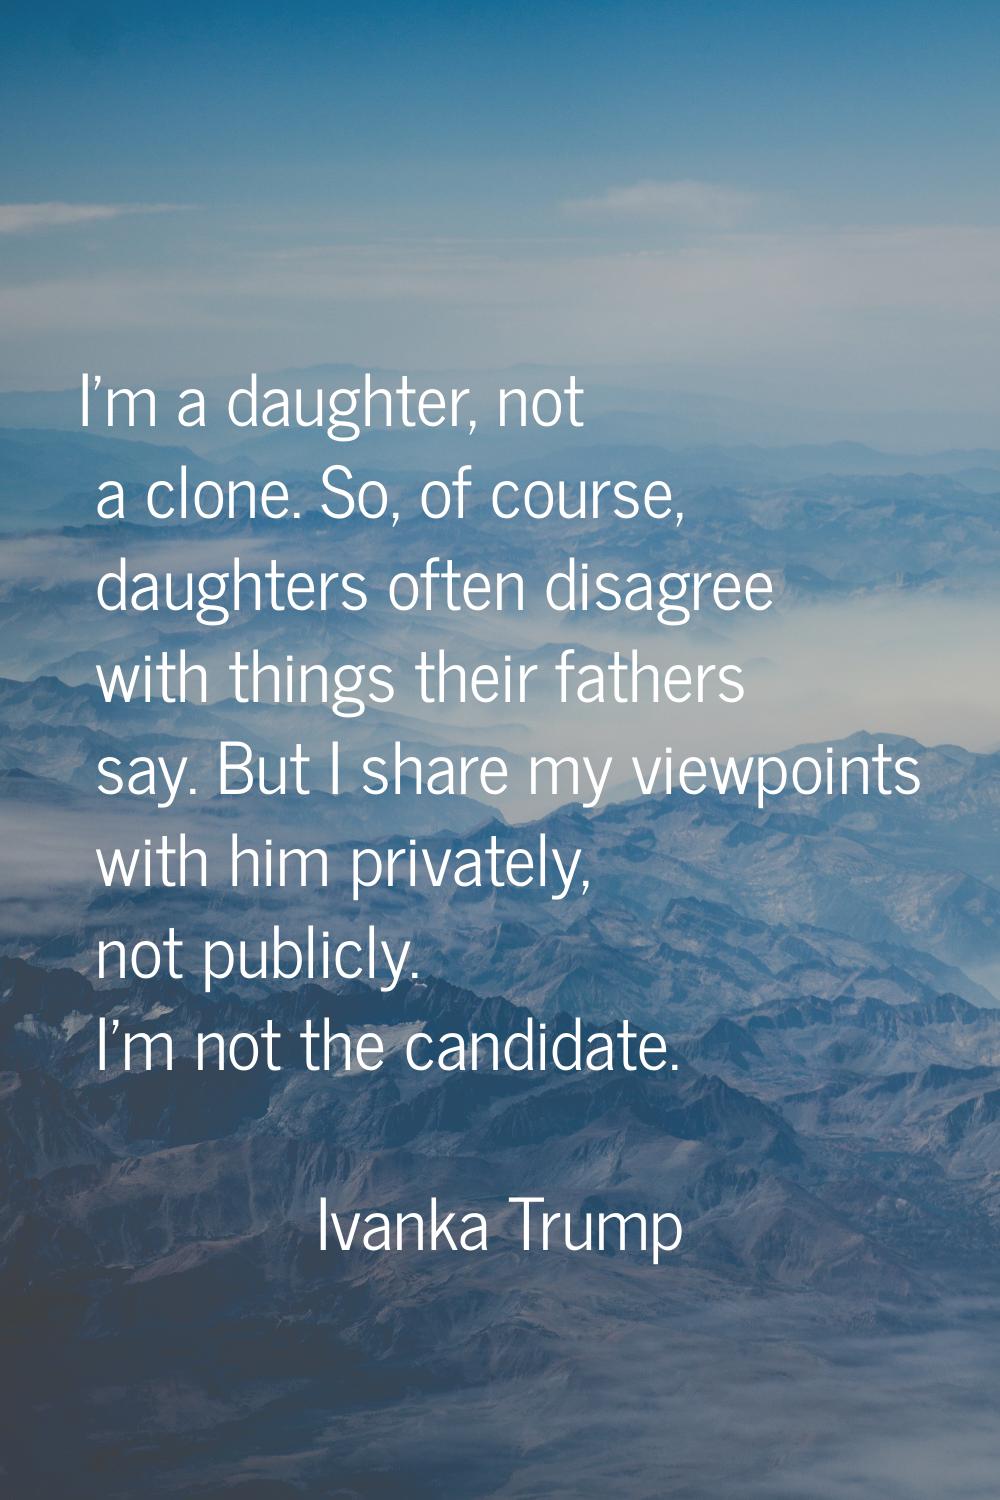 I'm a daughter, not a clone. So, of course, daughters often disagree with things their fathers say.